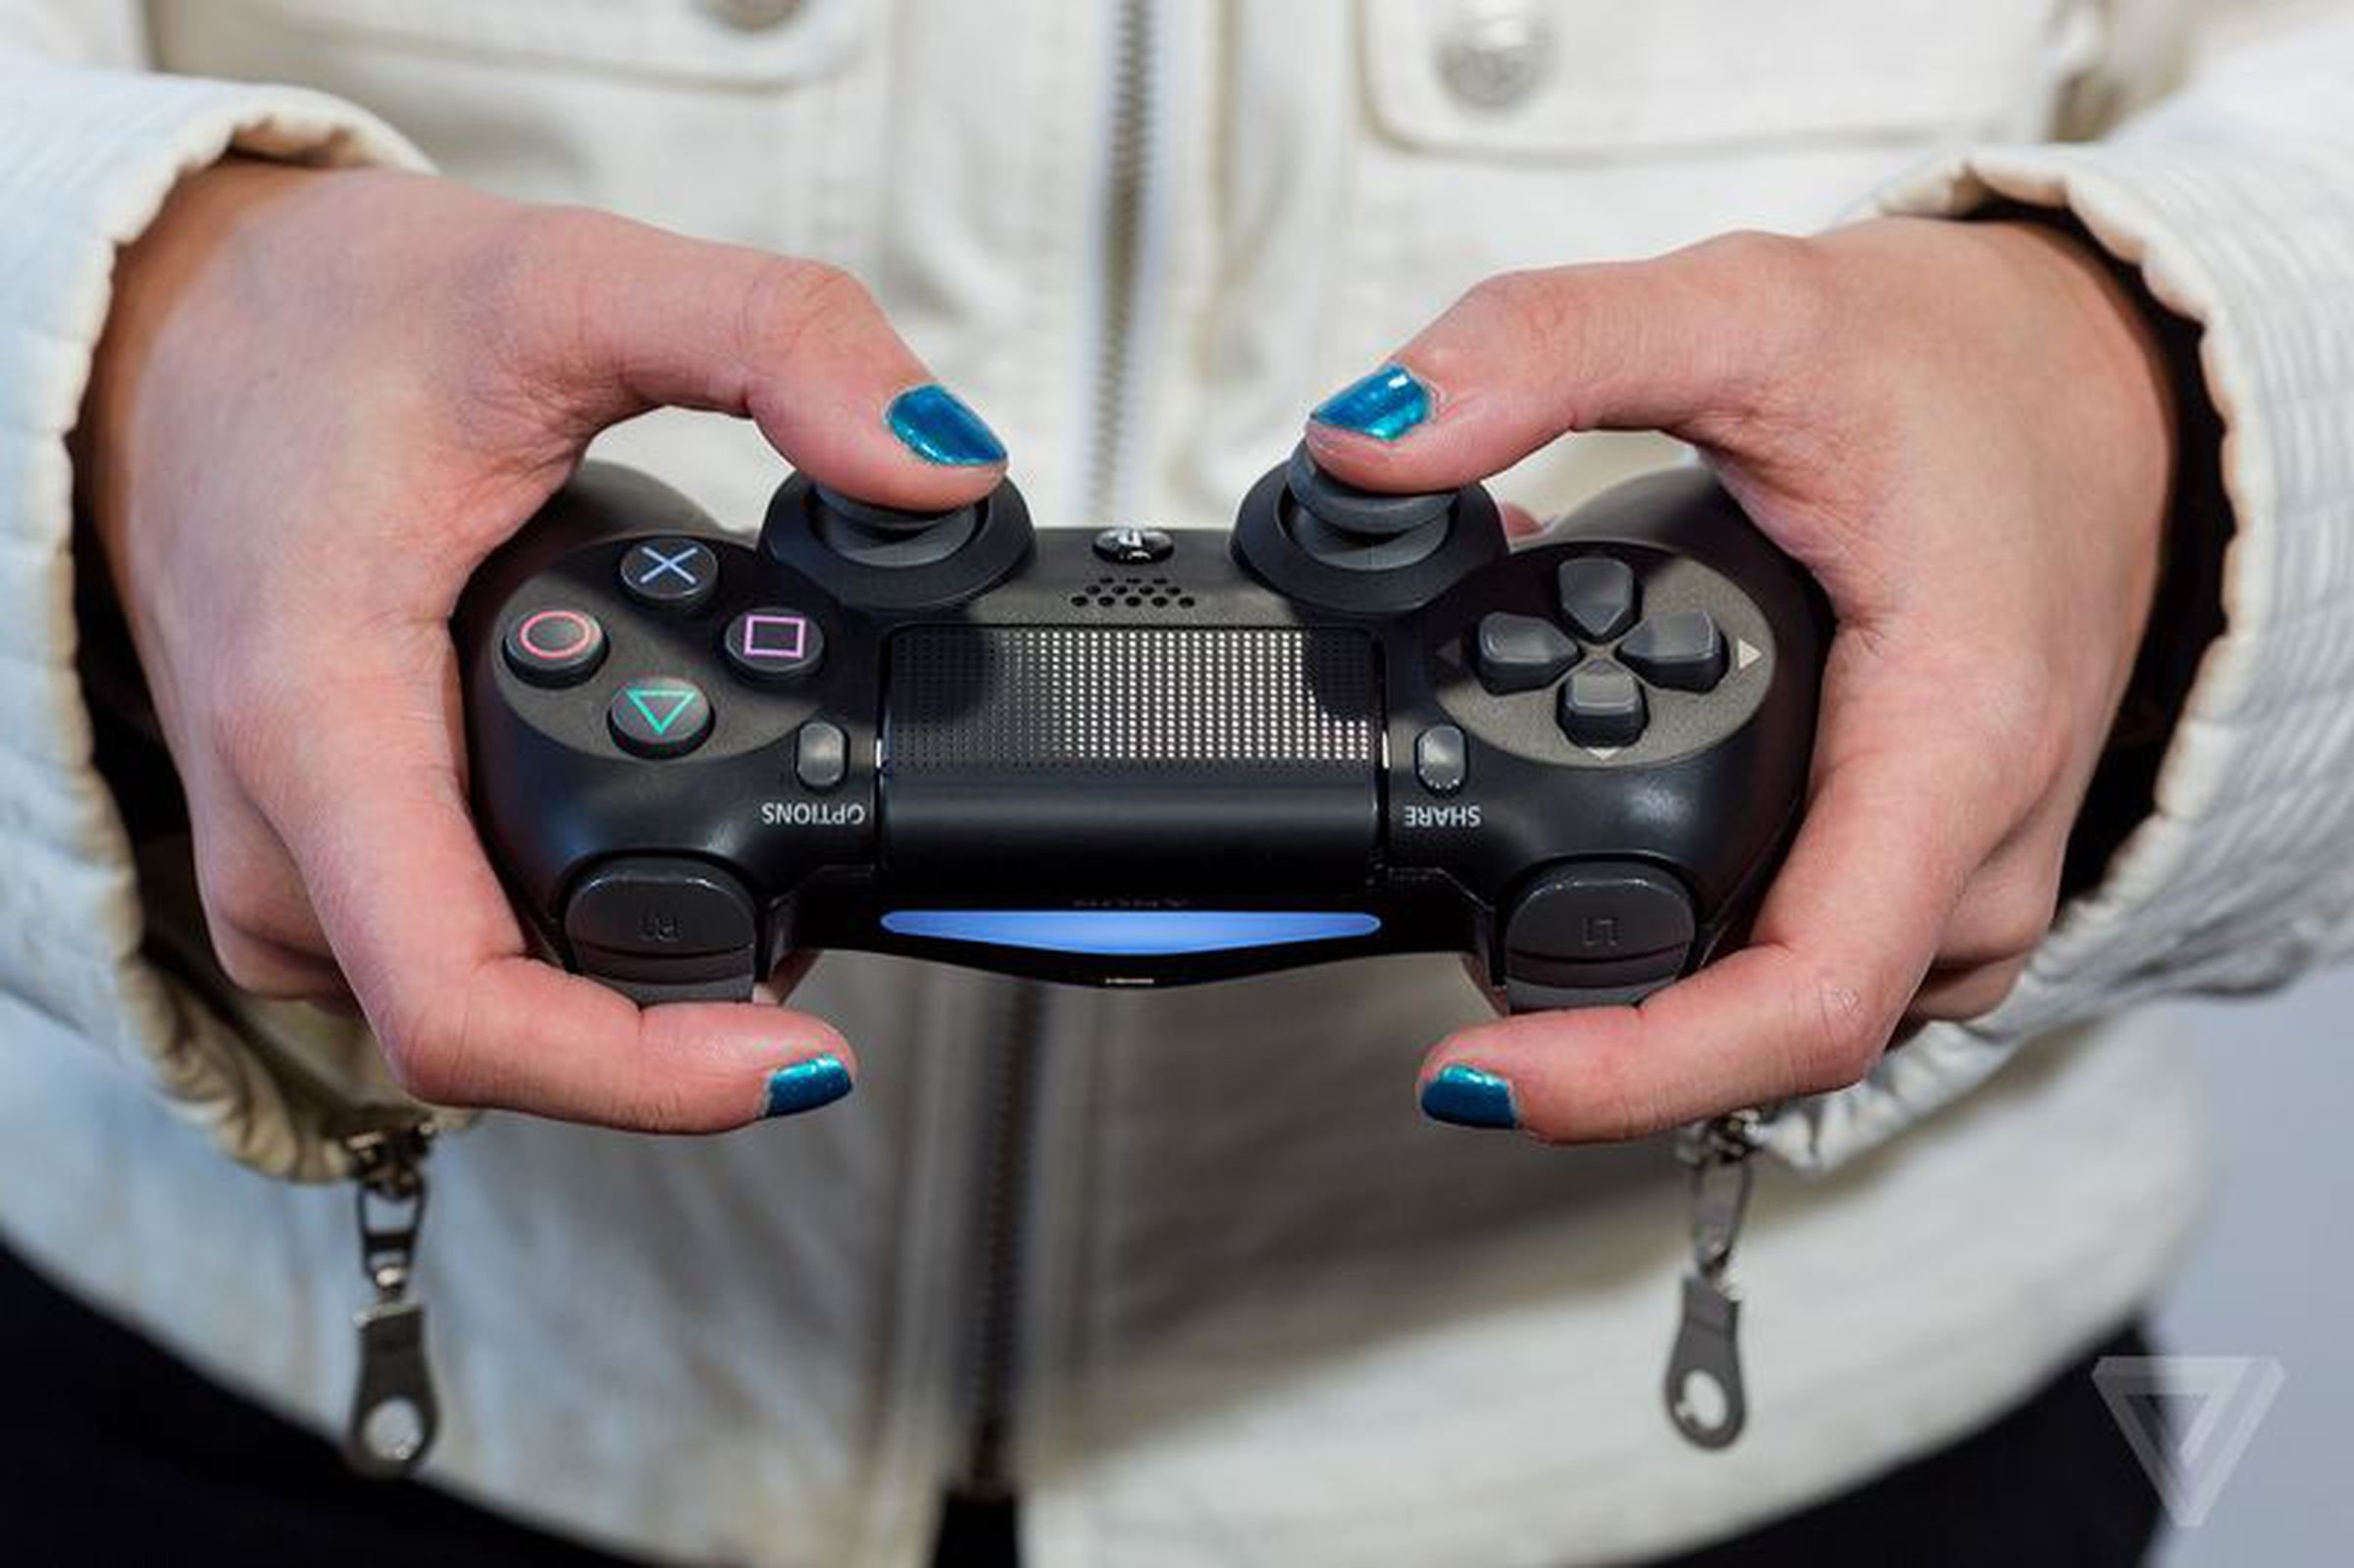 The older DualShock 4 uses Micro USB to charge and reconnect, and its rear LED signals connectivity and charging.